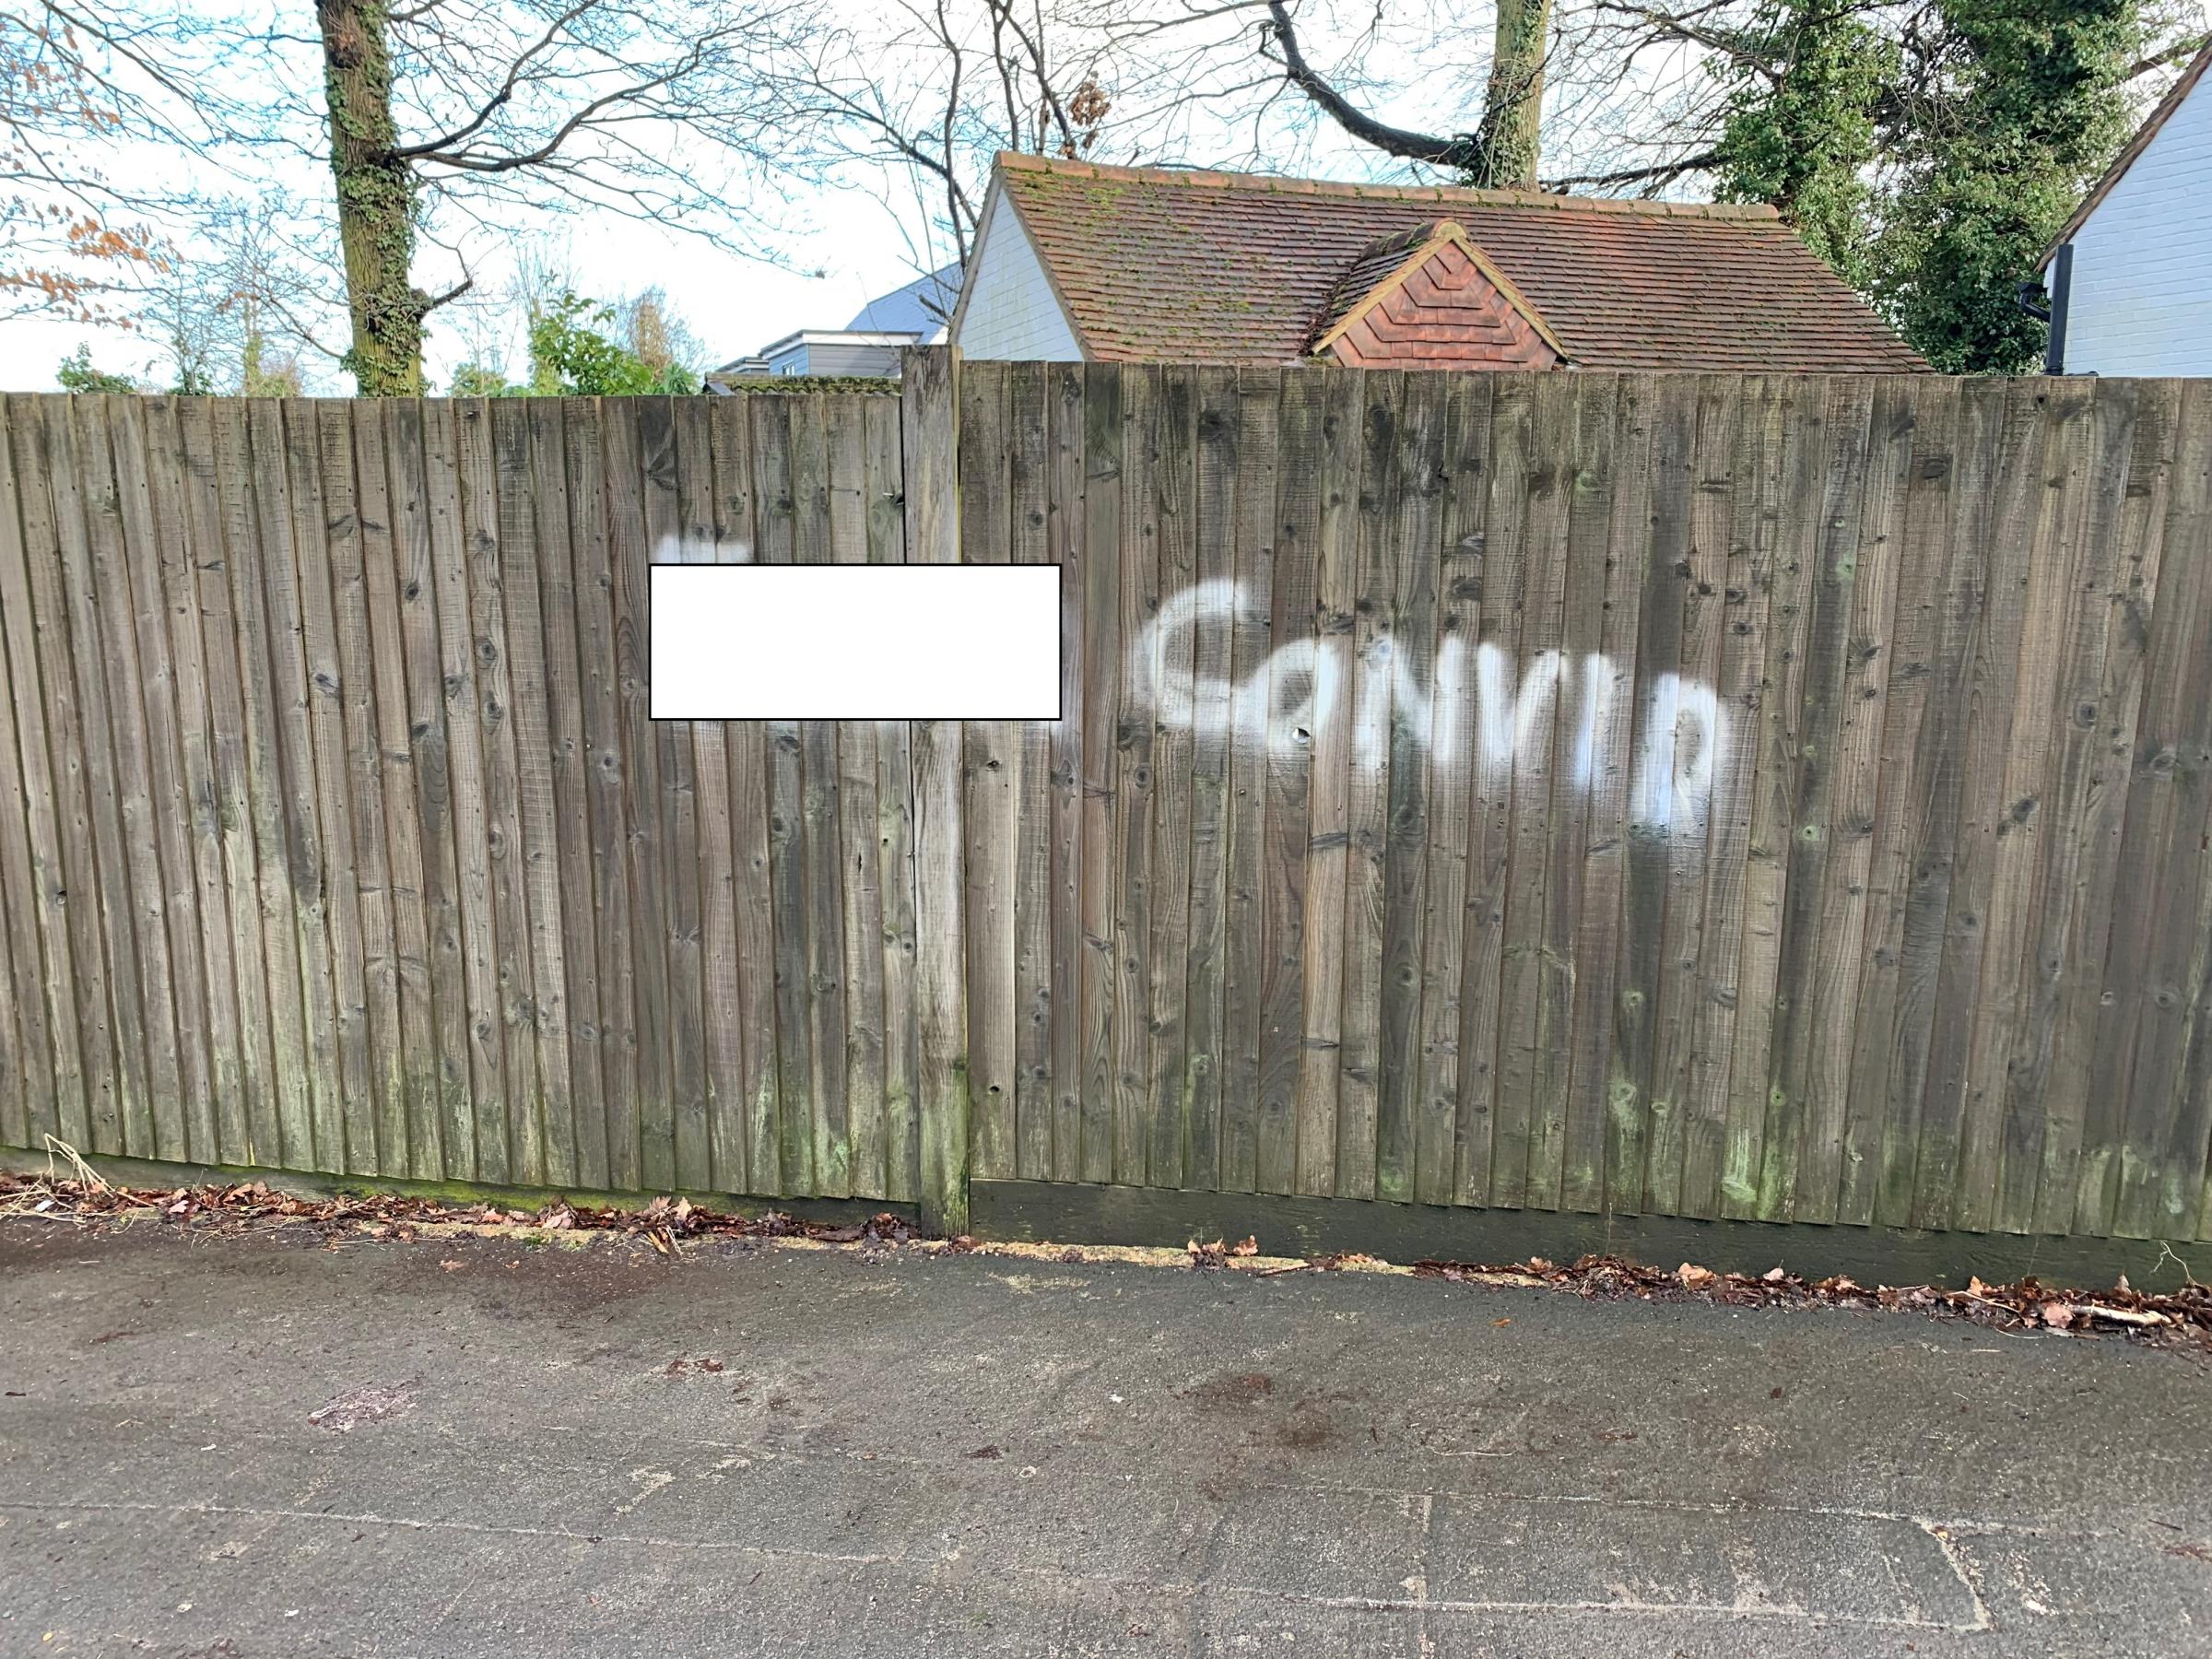 This particular graffiti in Mount Pleasant Lane has since been cleaned away